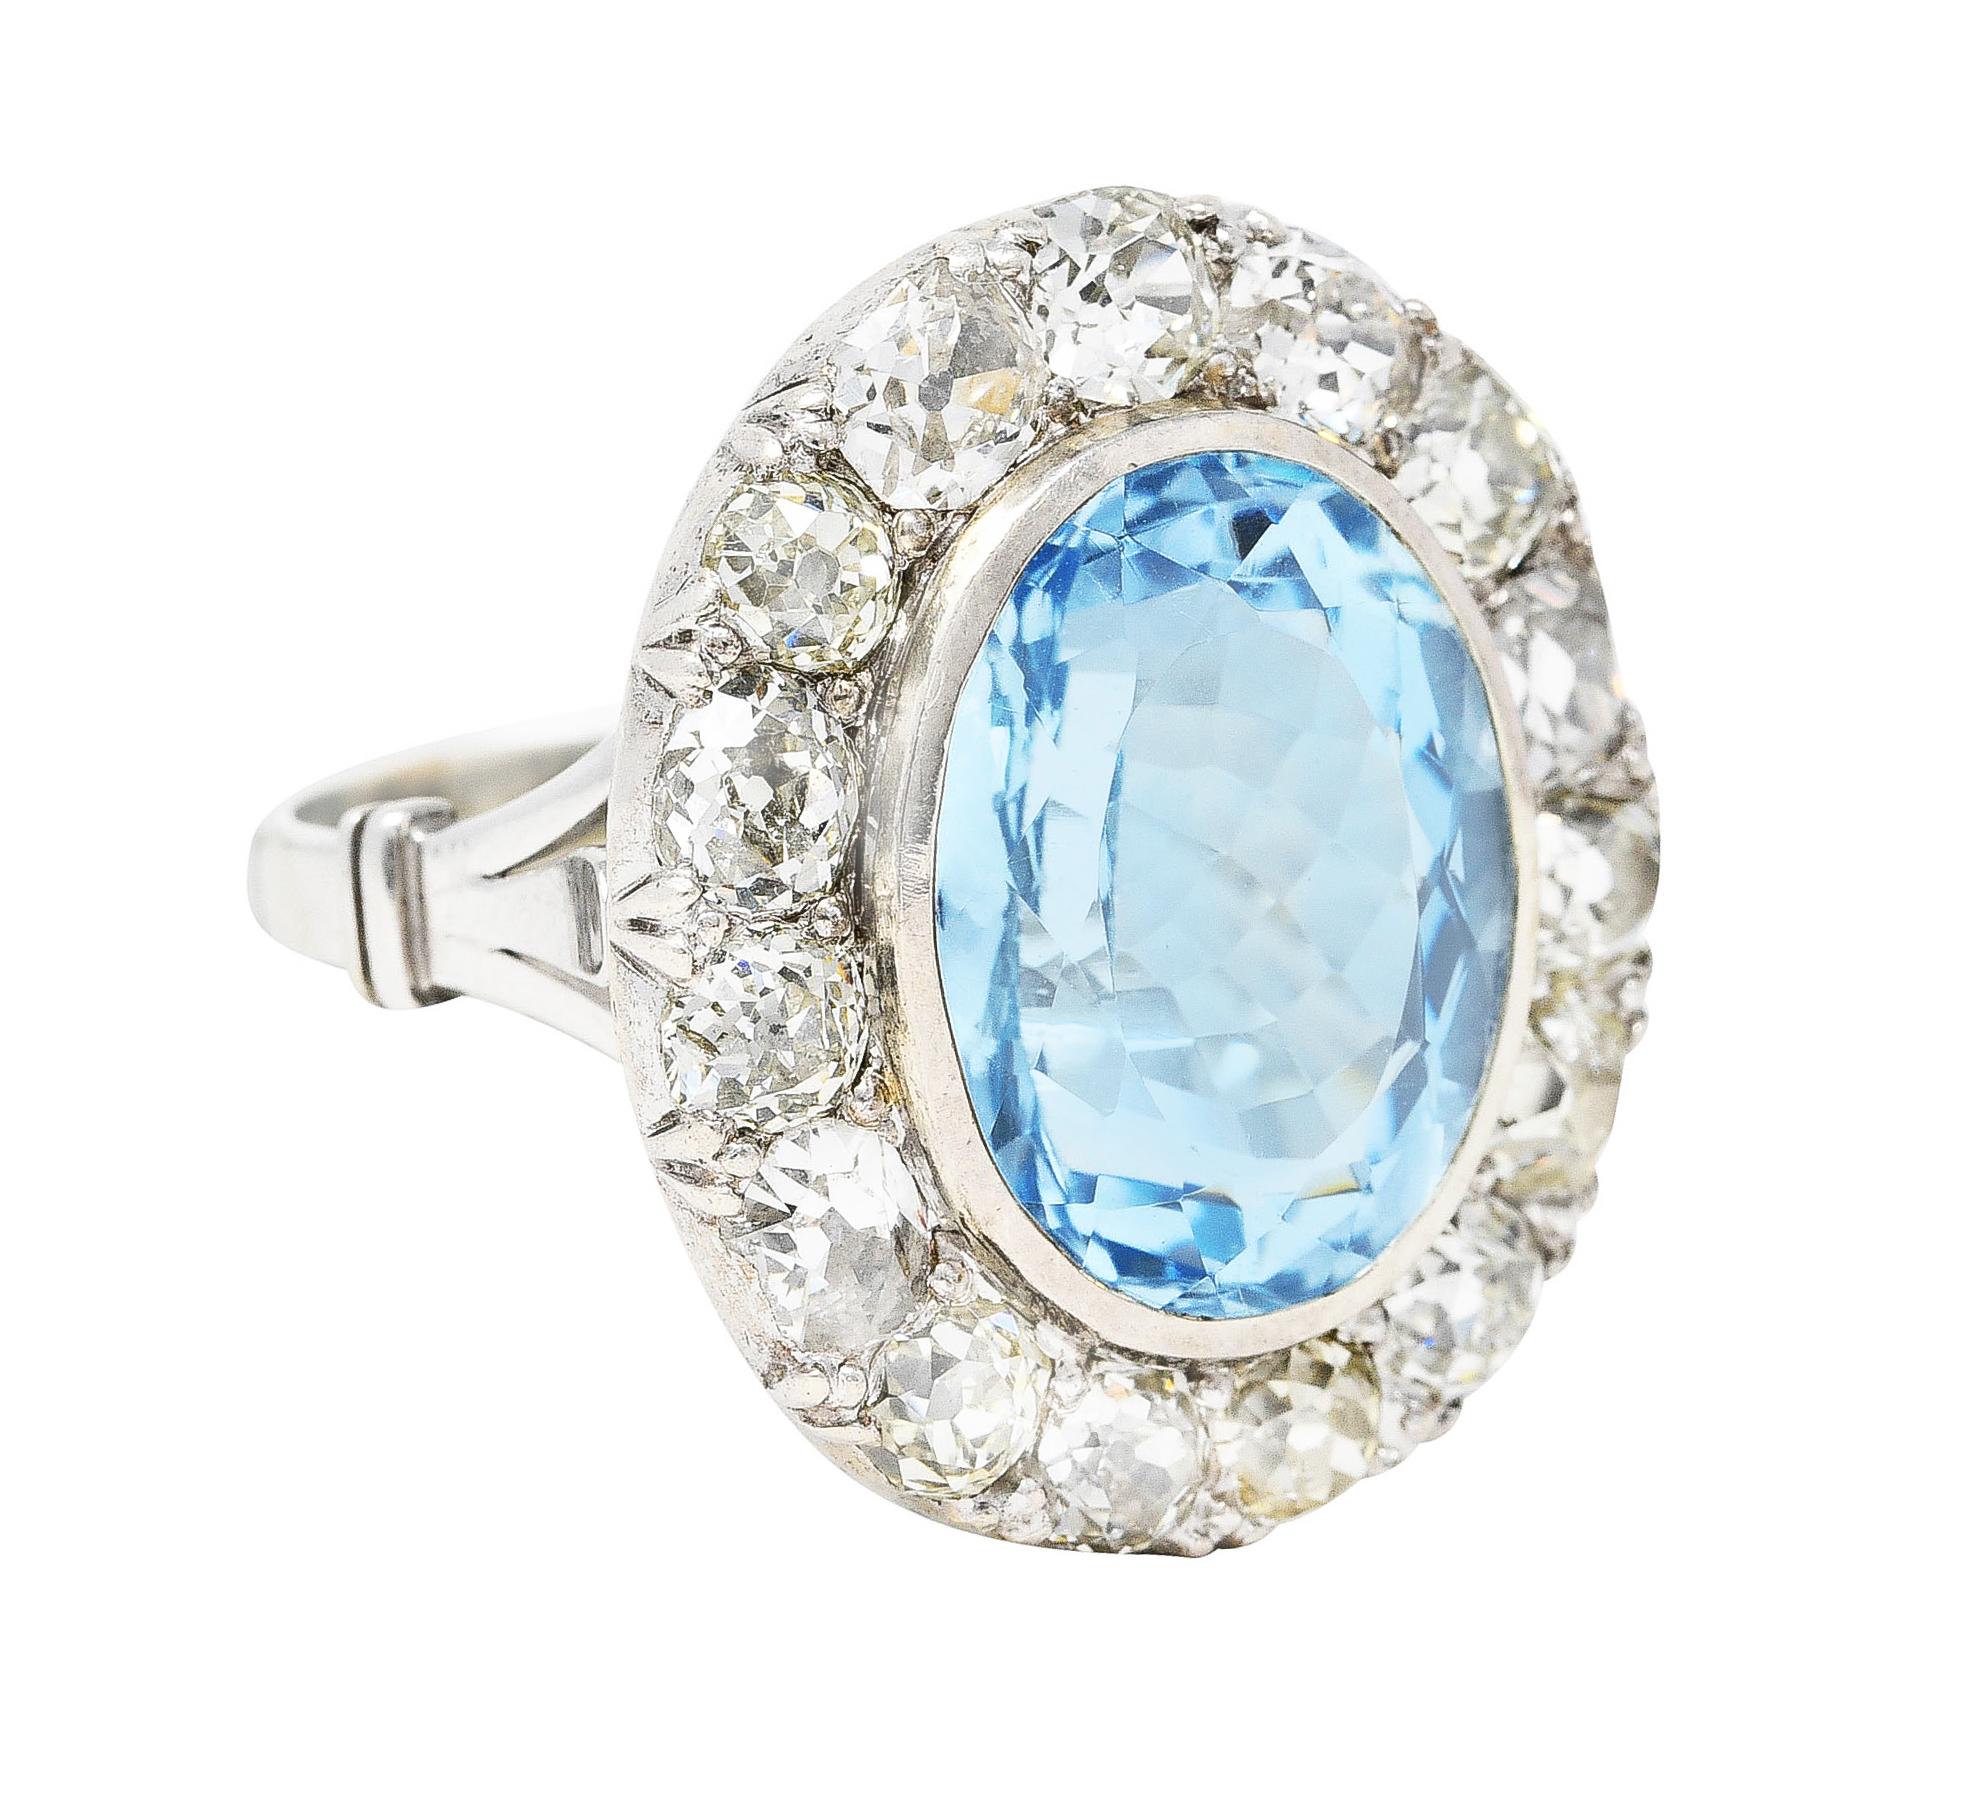 Cluster ring features a mixed oval cut blue topaz measuring 15.5 x 12.2 mm. Transparent with light greenish blue color. Bezel set in polished white gold and surrounded by old mine cut diamonds. Total diamond weight is approximately 3.75 carats. Near